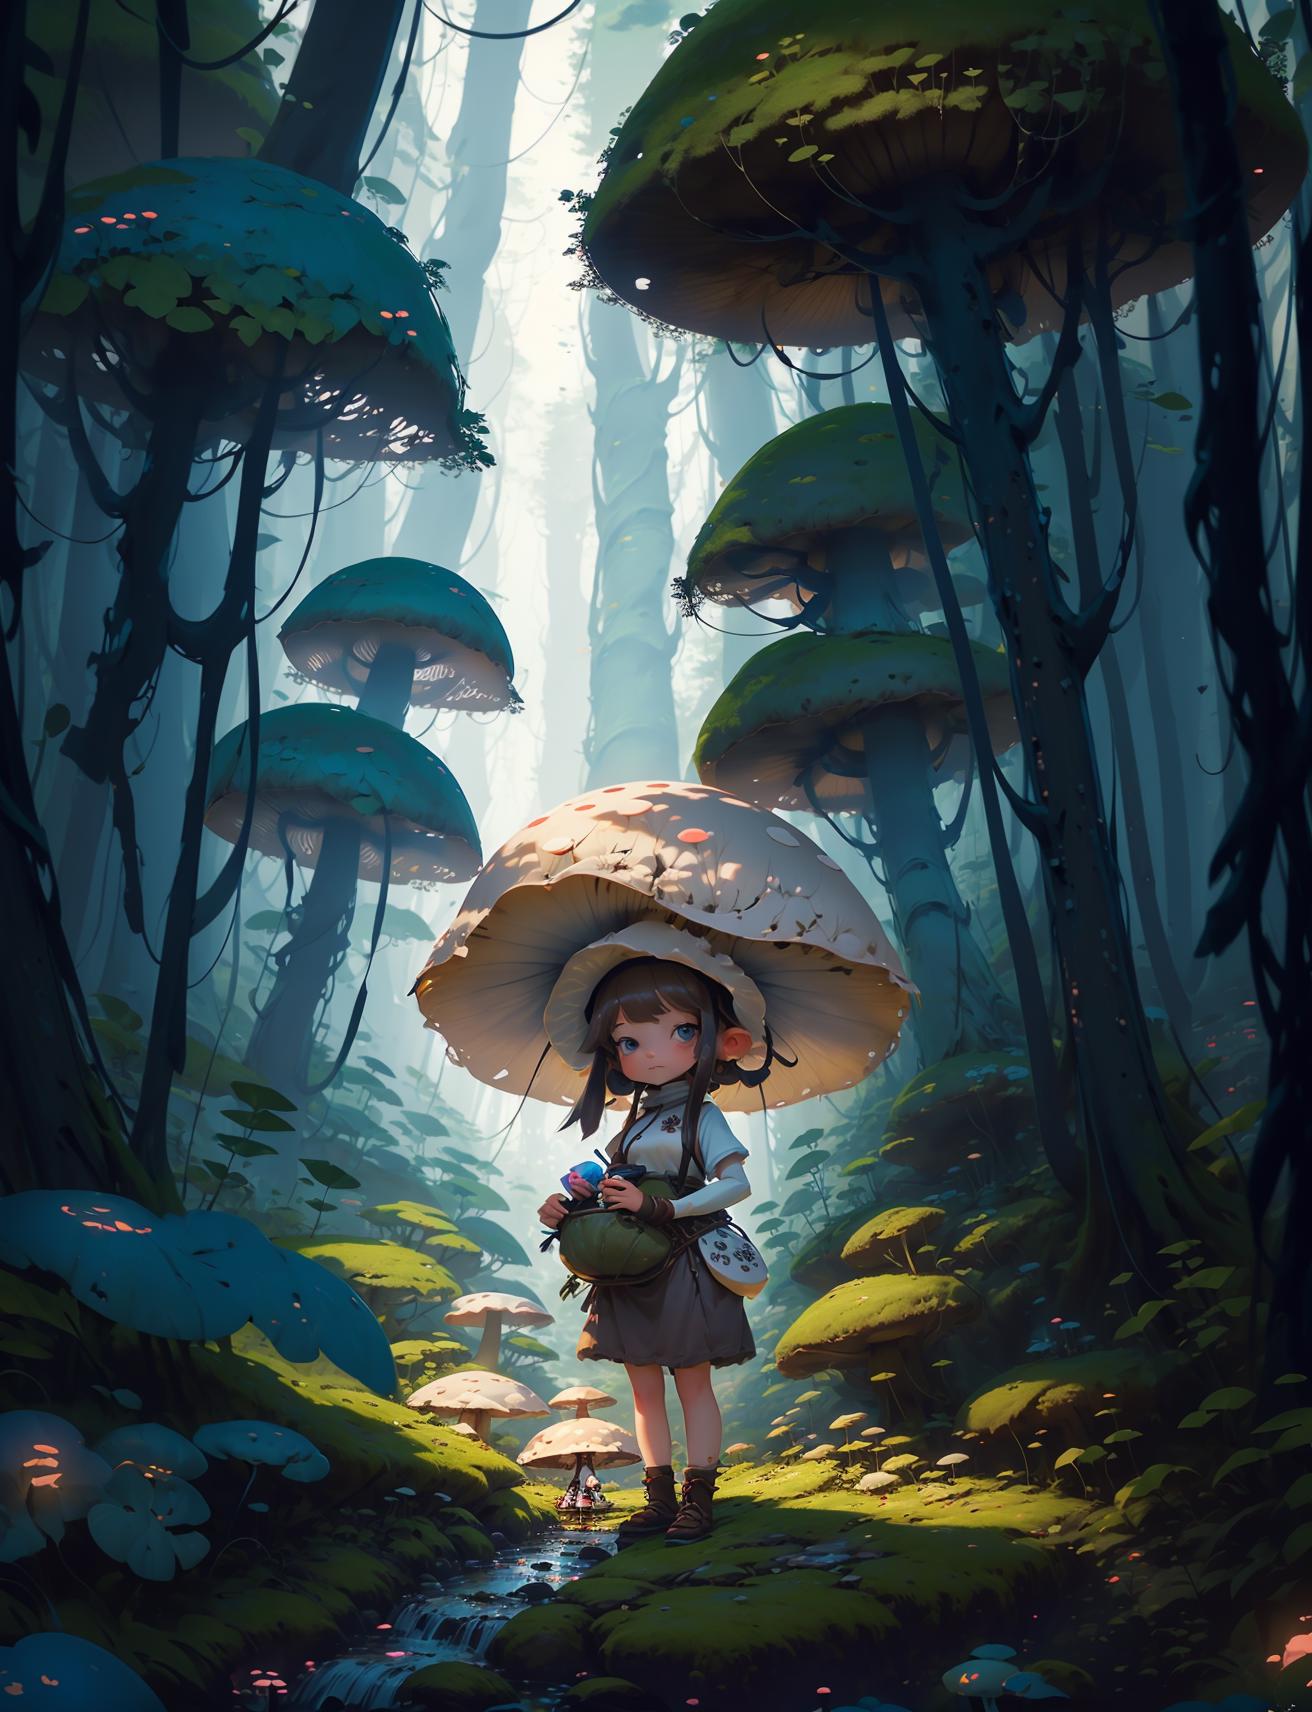 A Little Girl Walking Through a Mushroom Forest with a White Umbrella